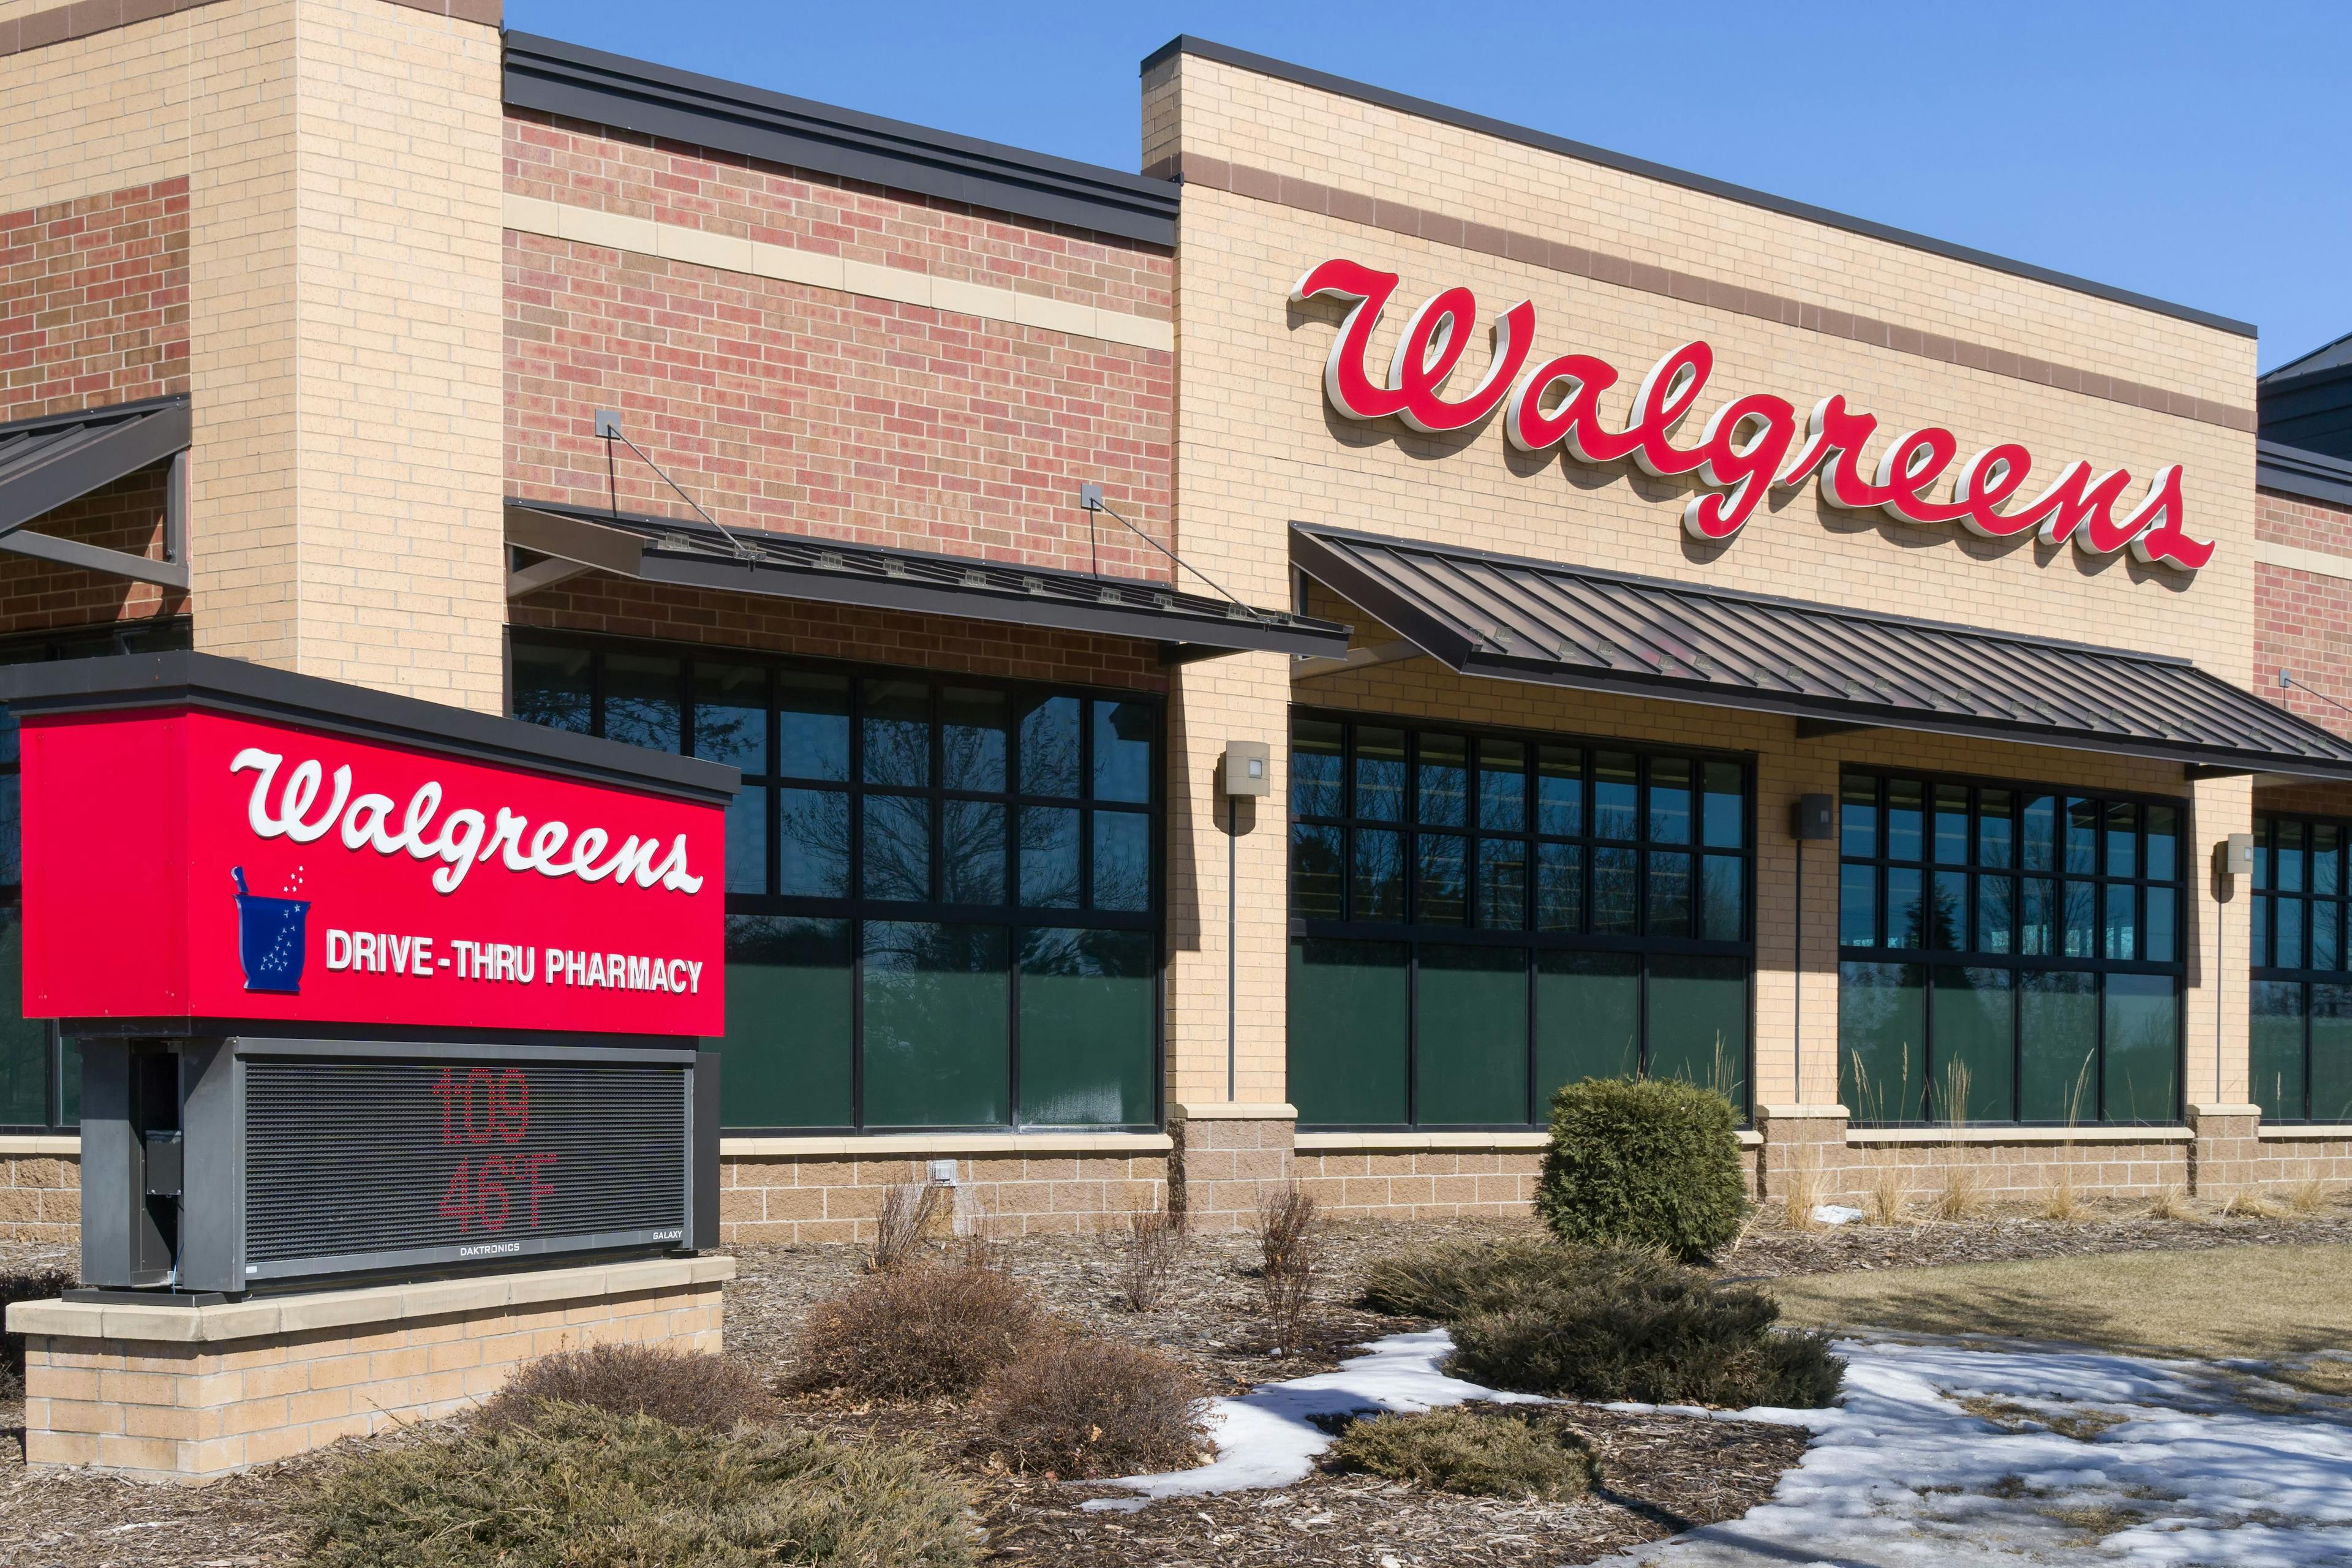 Walgreens expanding its primary care push: ©Wolterke - stock.adobe.com